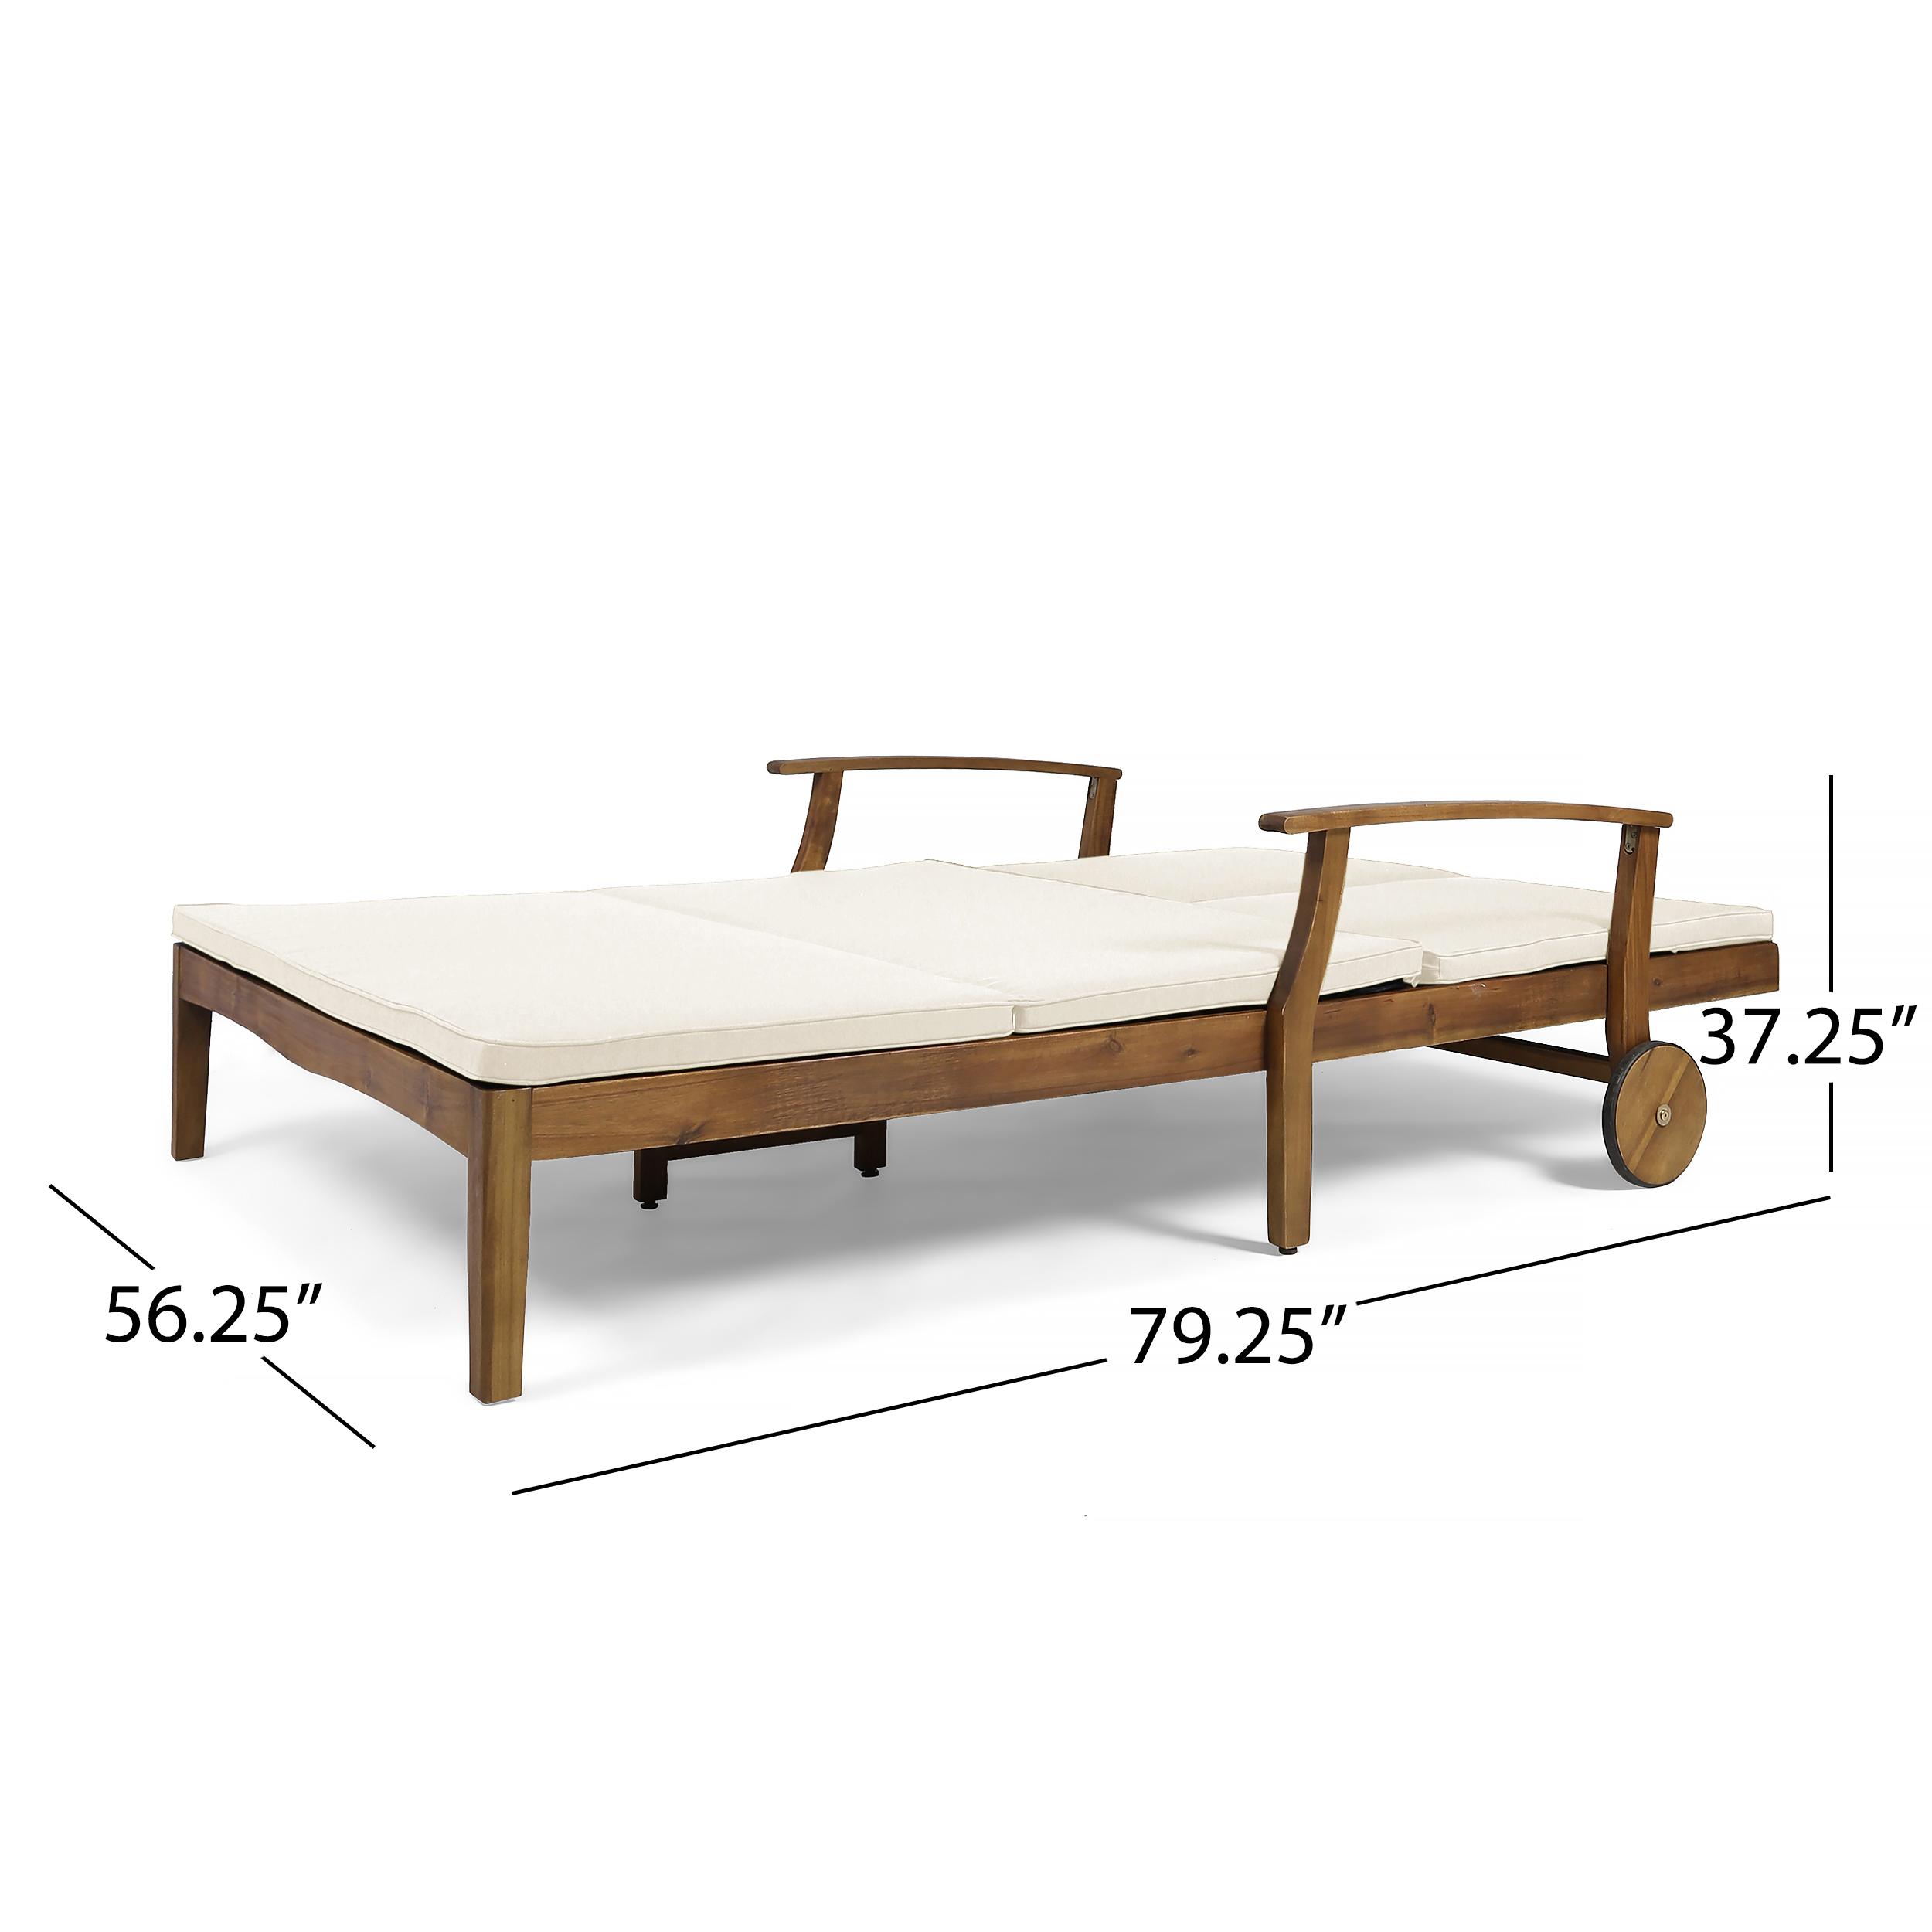 Danielle Outdoor Acacia Wood Double Chaise Lounge with Cushion, Teak, Cream - image 5 of 6